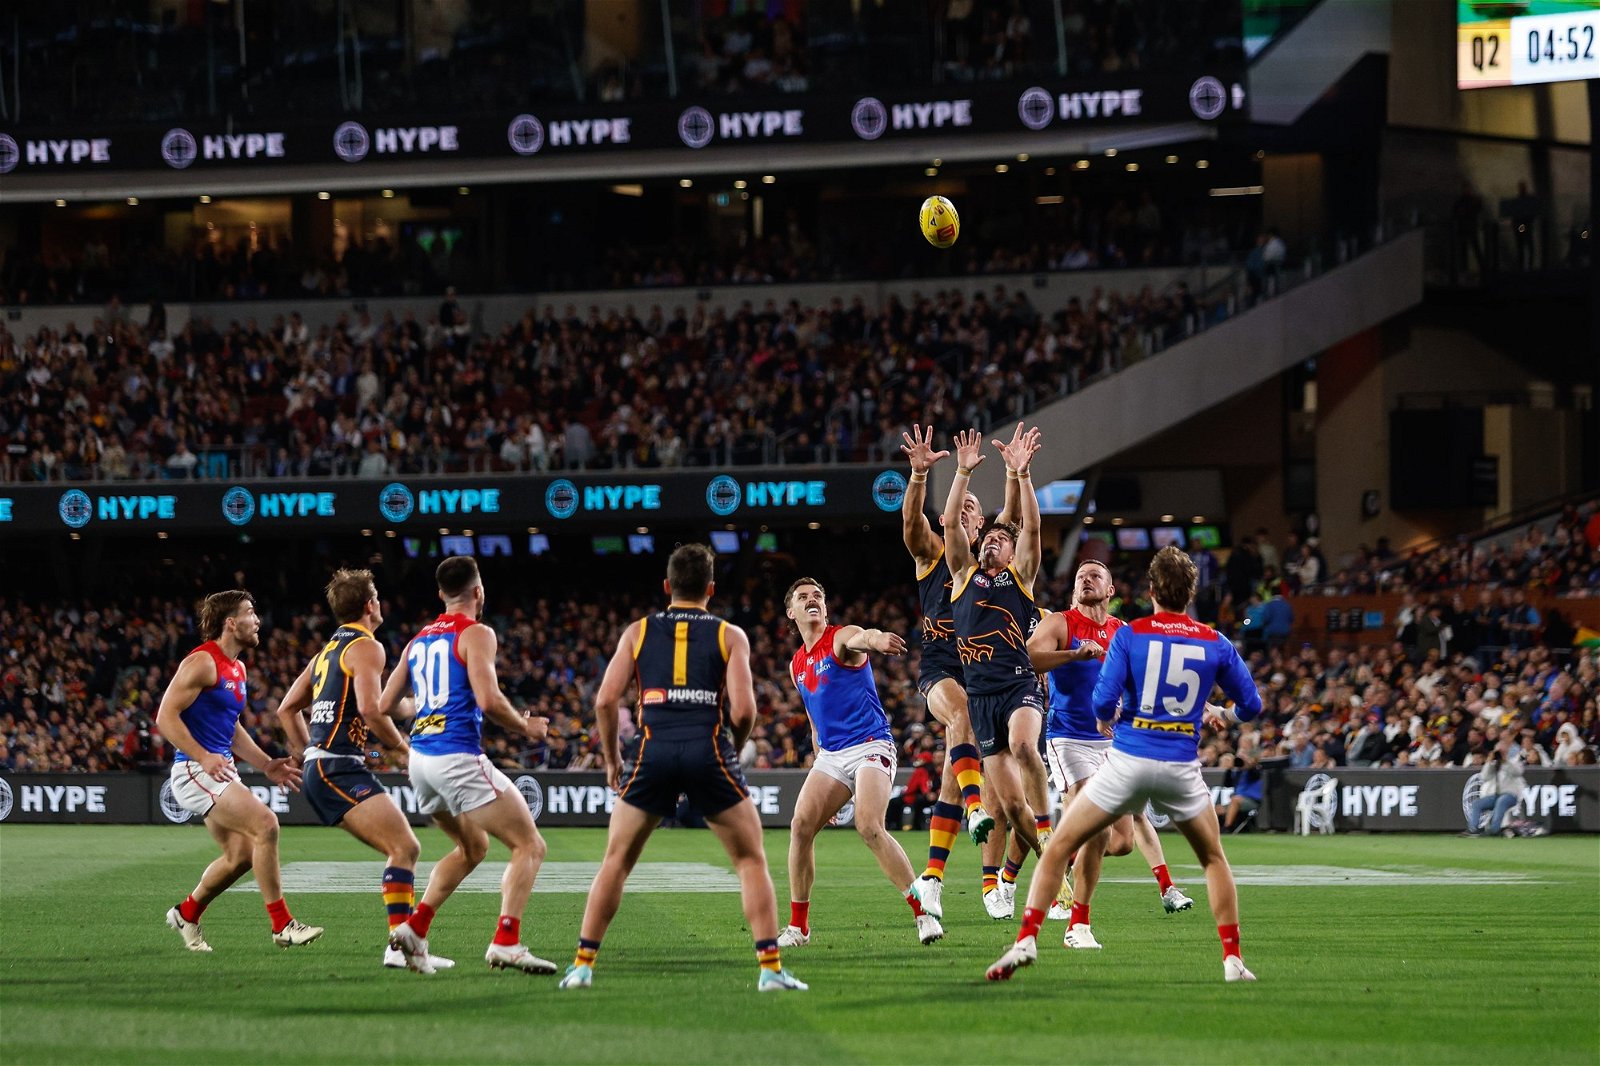 Crows and Demons players contest the ball